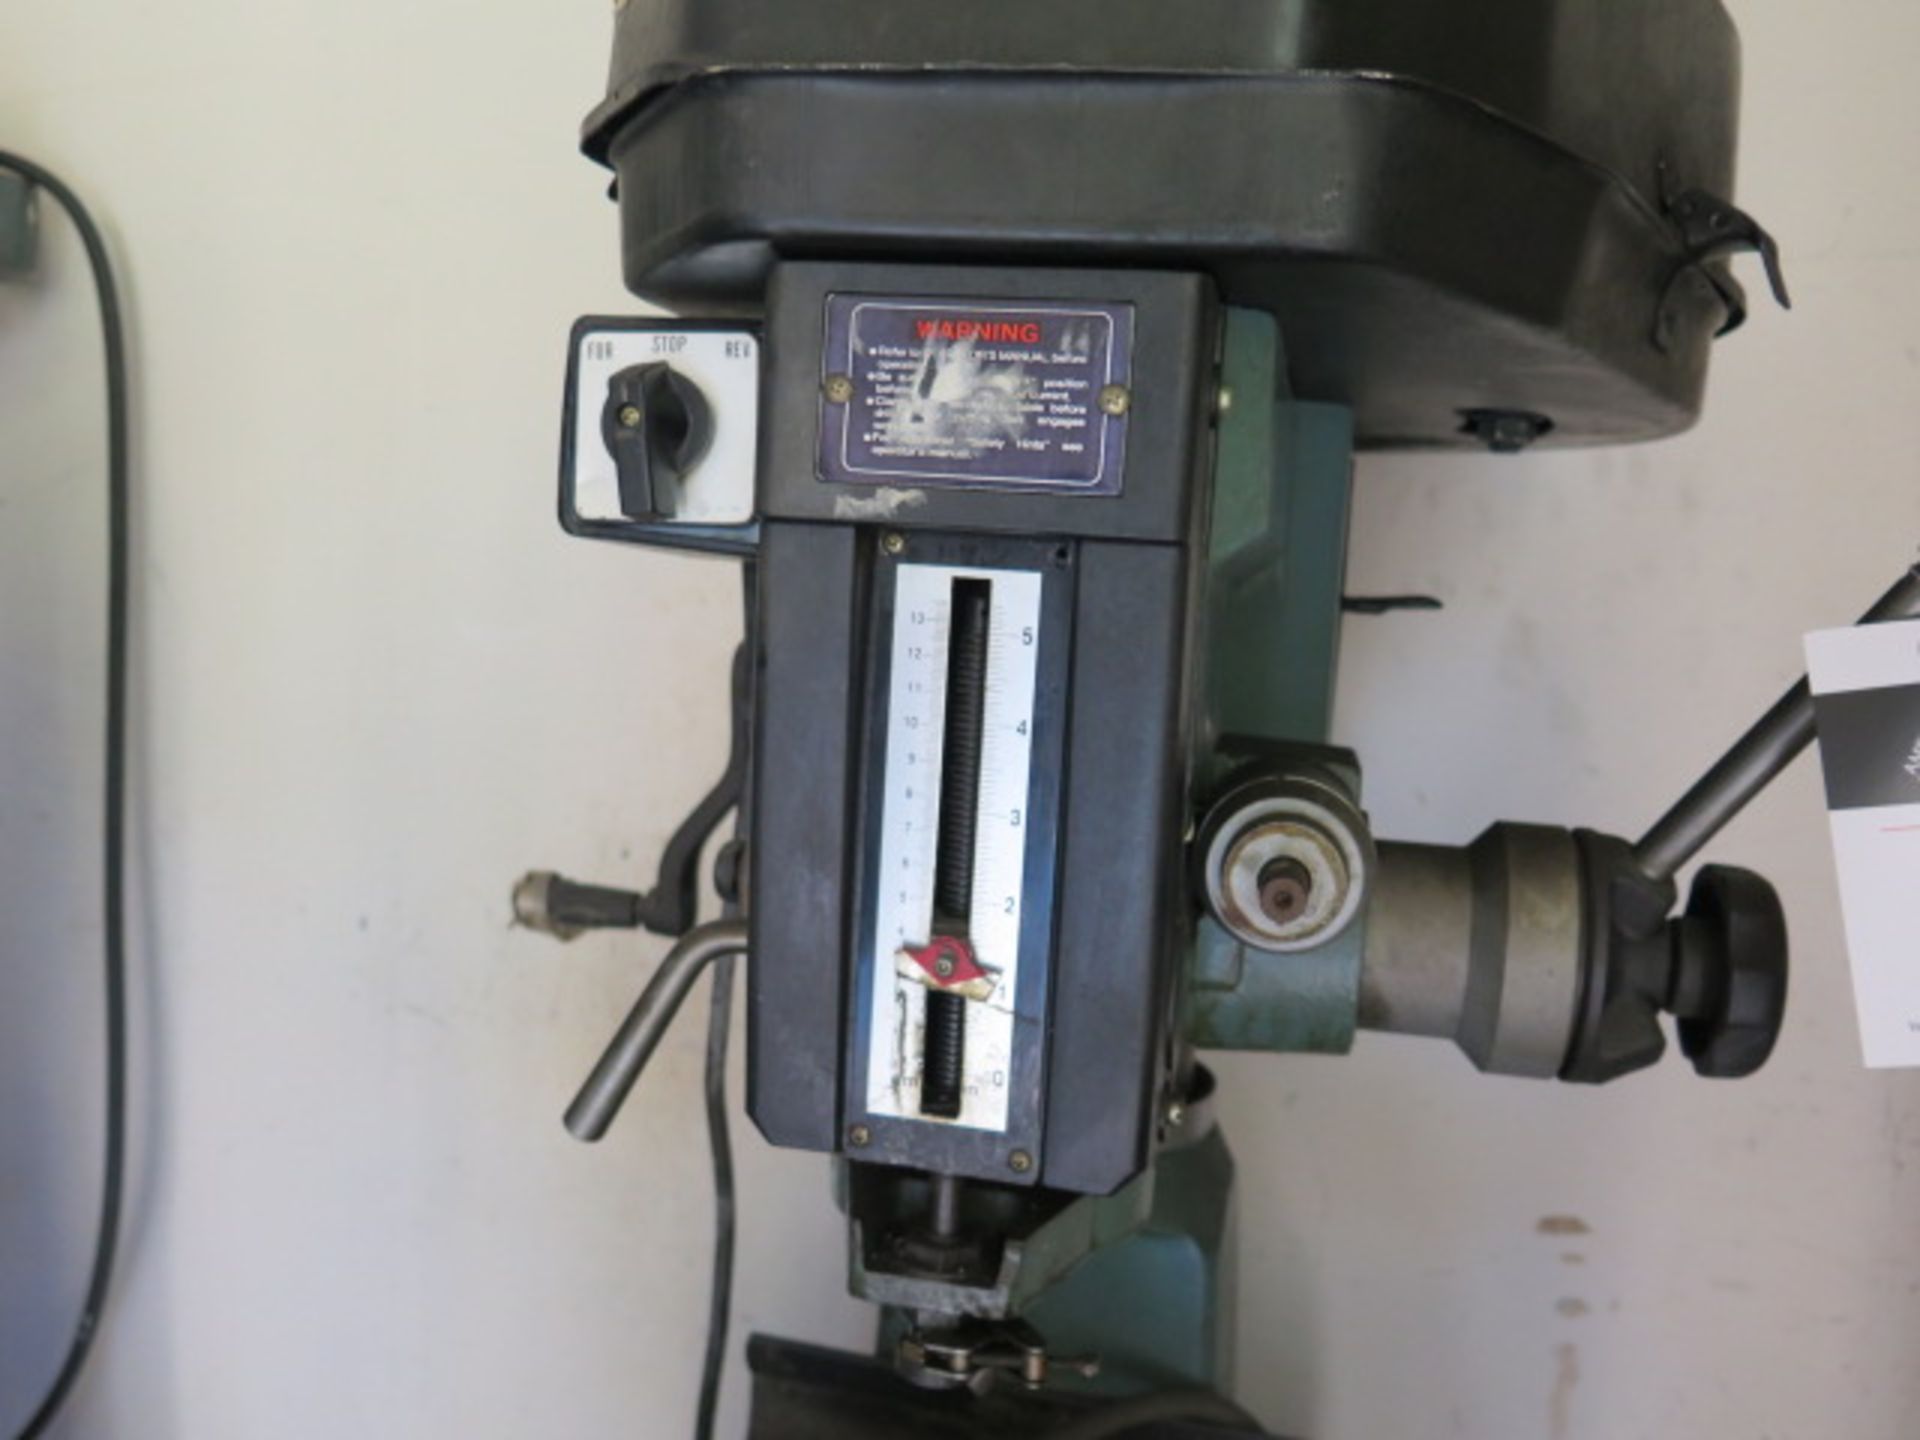 Enco 105-1120 Mill/Drill Machine s/n 236304 w/ R8 Spindle, Pneumatic 5C Collet Closer, SOLD AS IS - Image 3 of 8